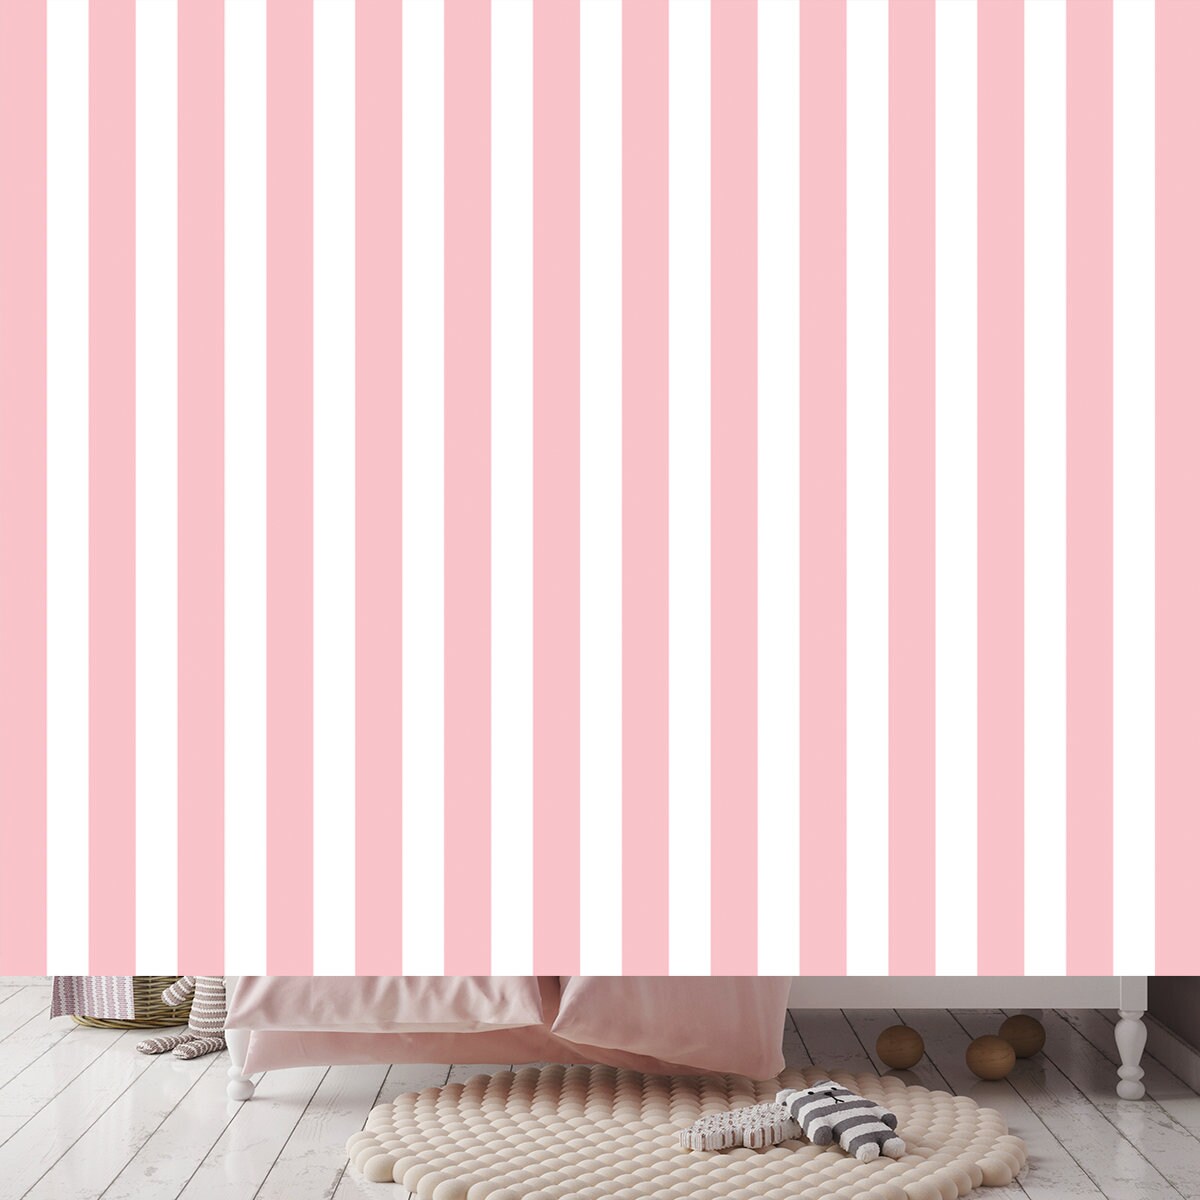 Pink and White Striped Background Wallpaper Girl Bedroom Mural